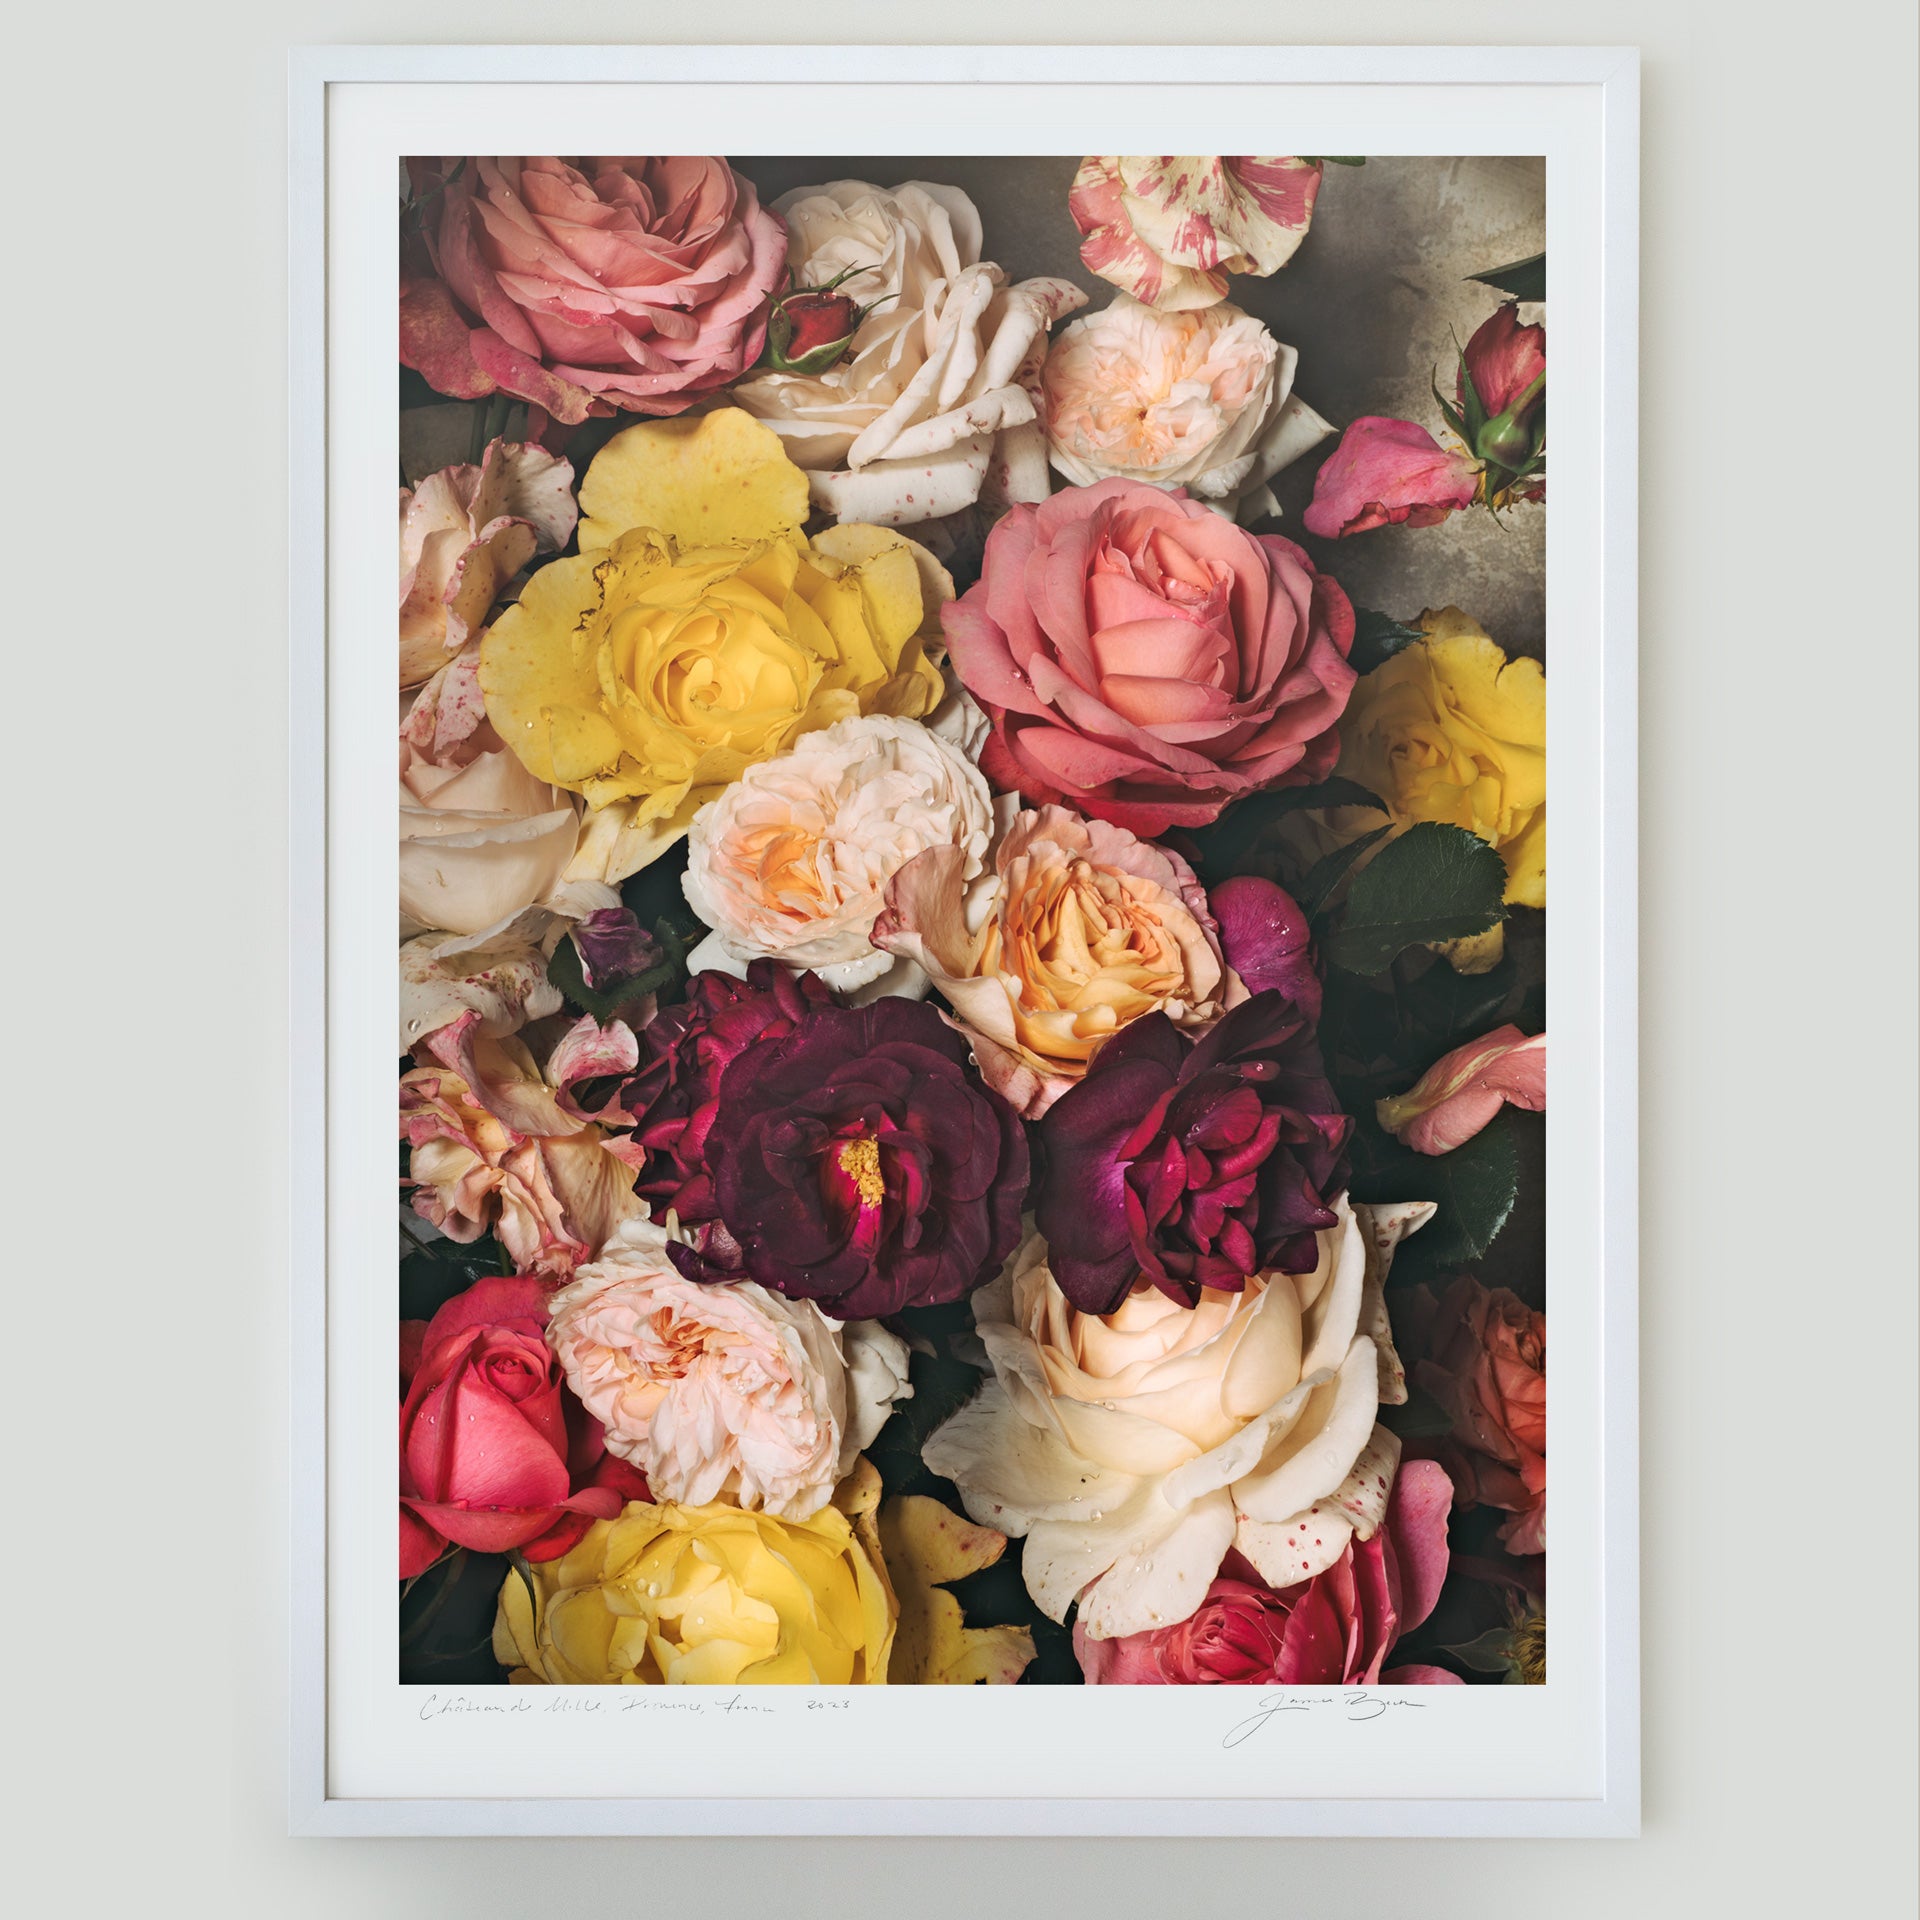 Floral Candy • 1 of 1 Framed Exhibition Piece